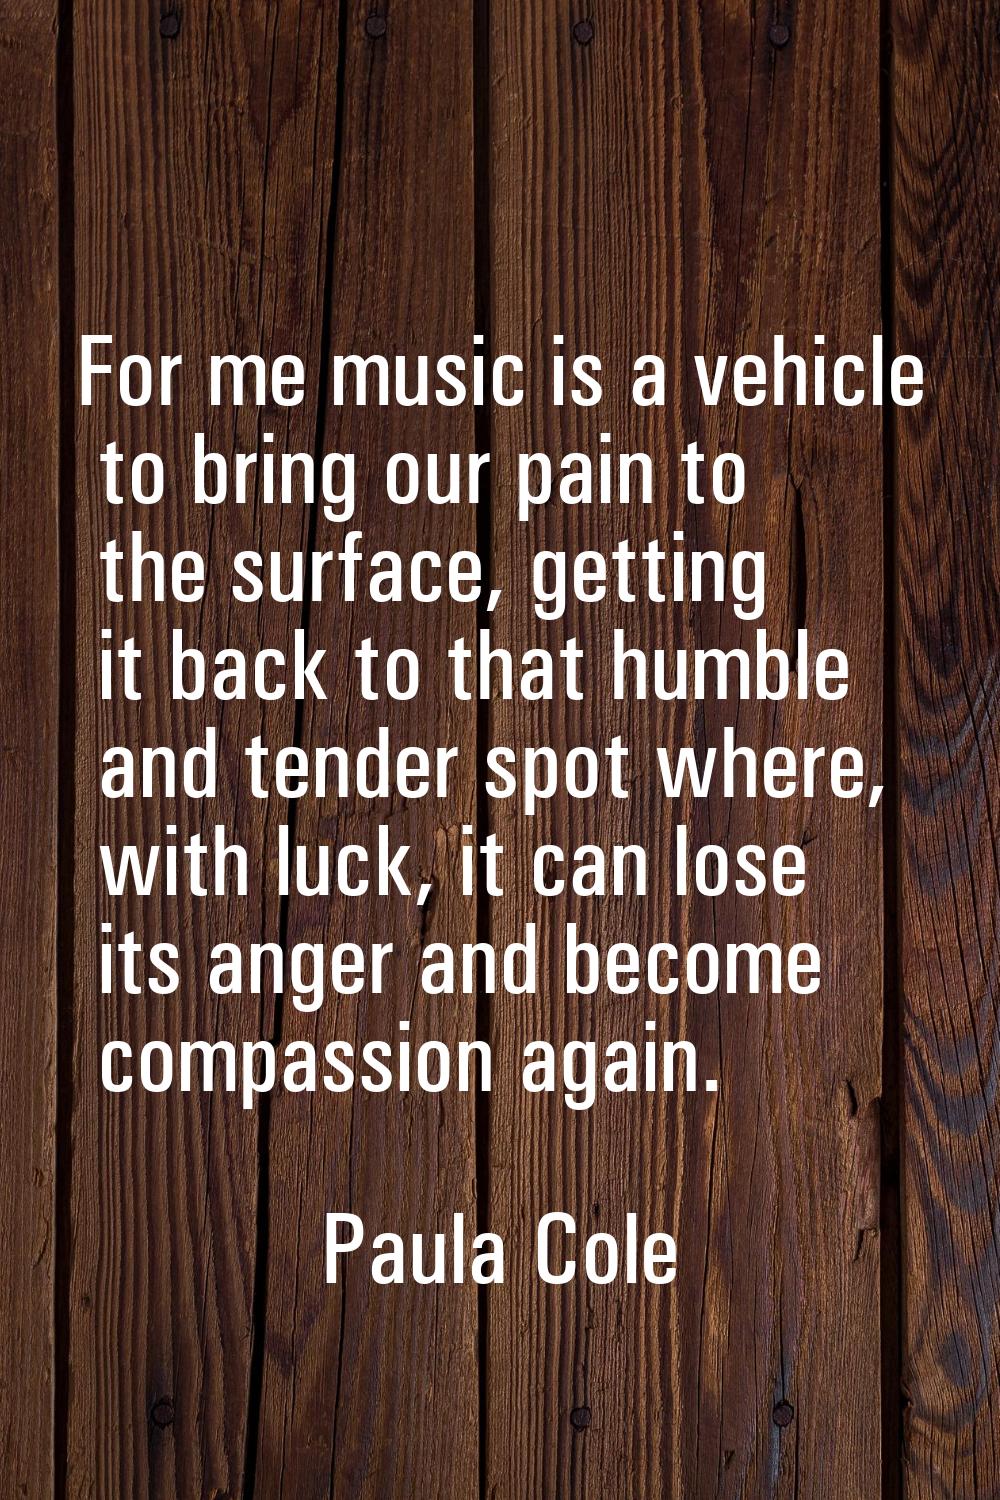 For me music is a vehicle to bring our pain to the surface, getting it back to that humble and tend